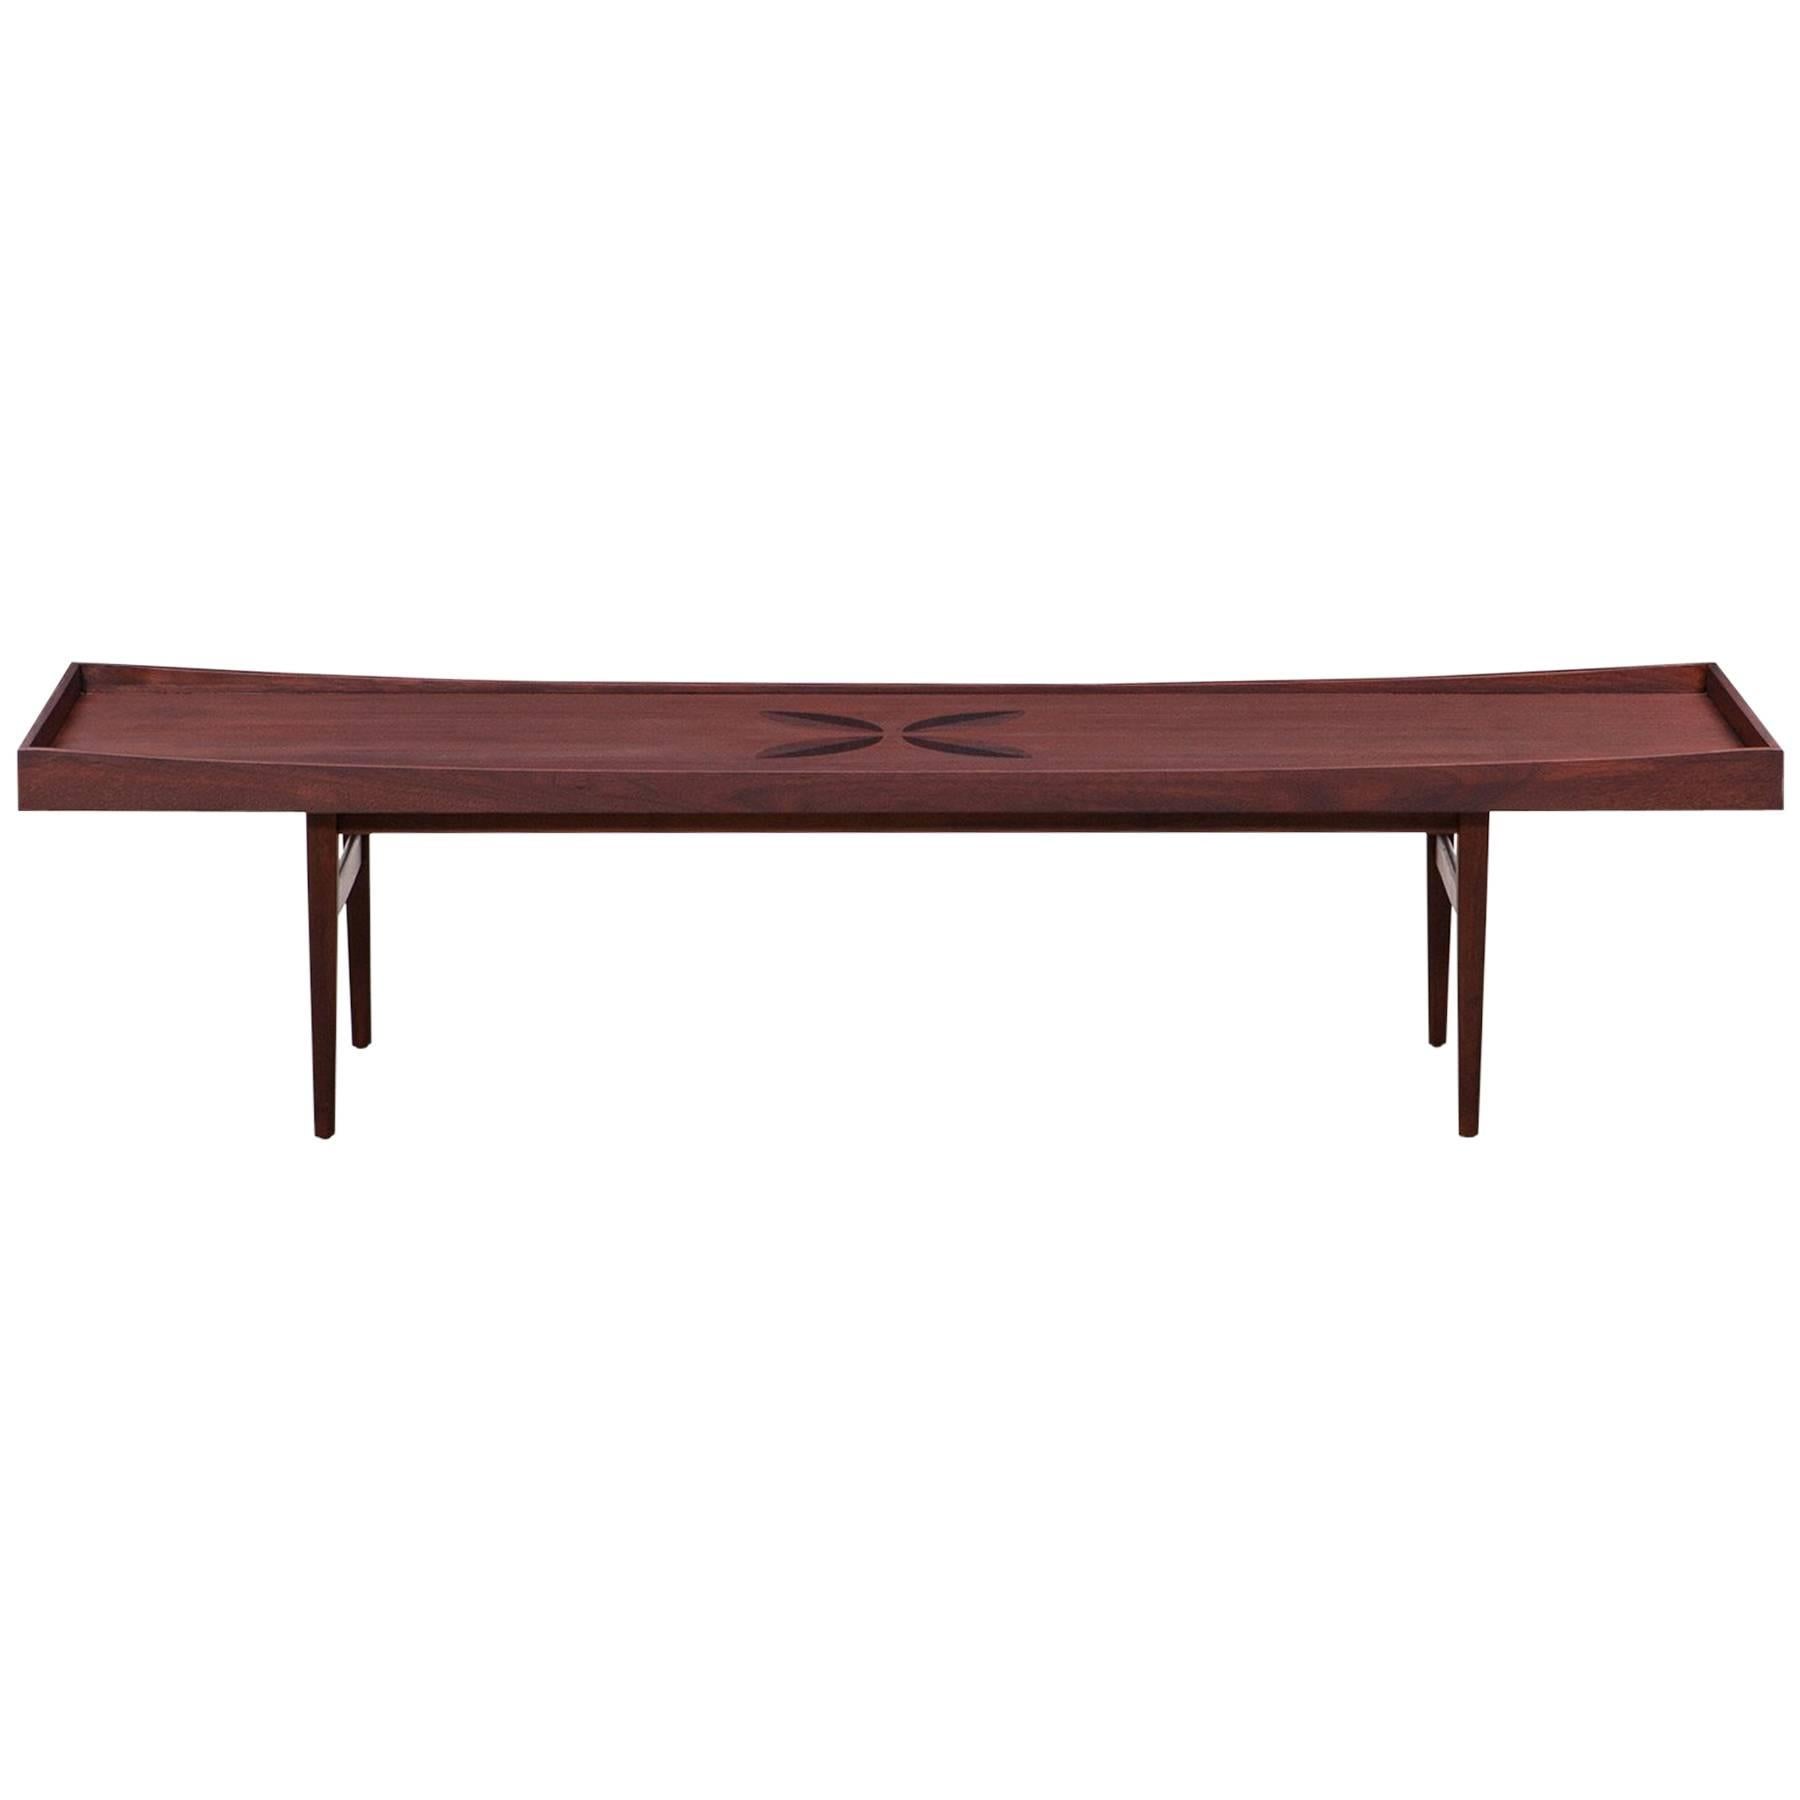 1950s Brown Wooden Coffee Table by Kipp Stewart For Sale